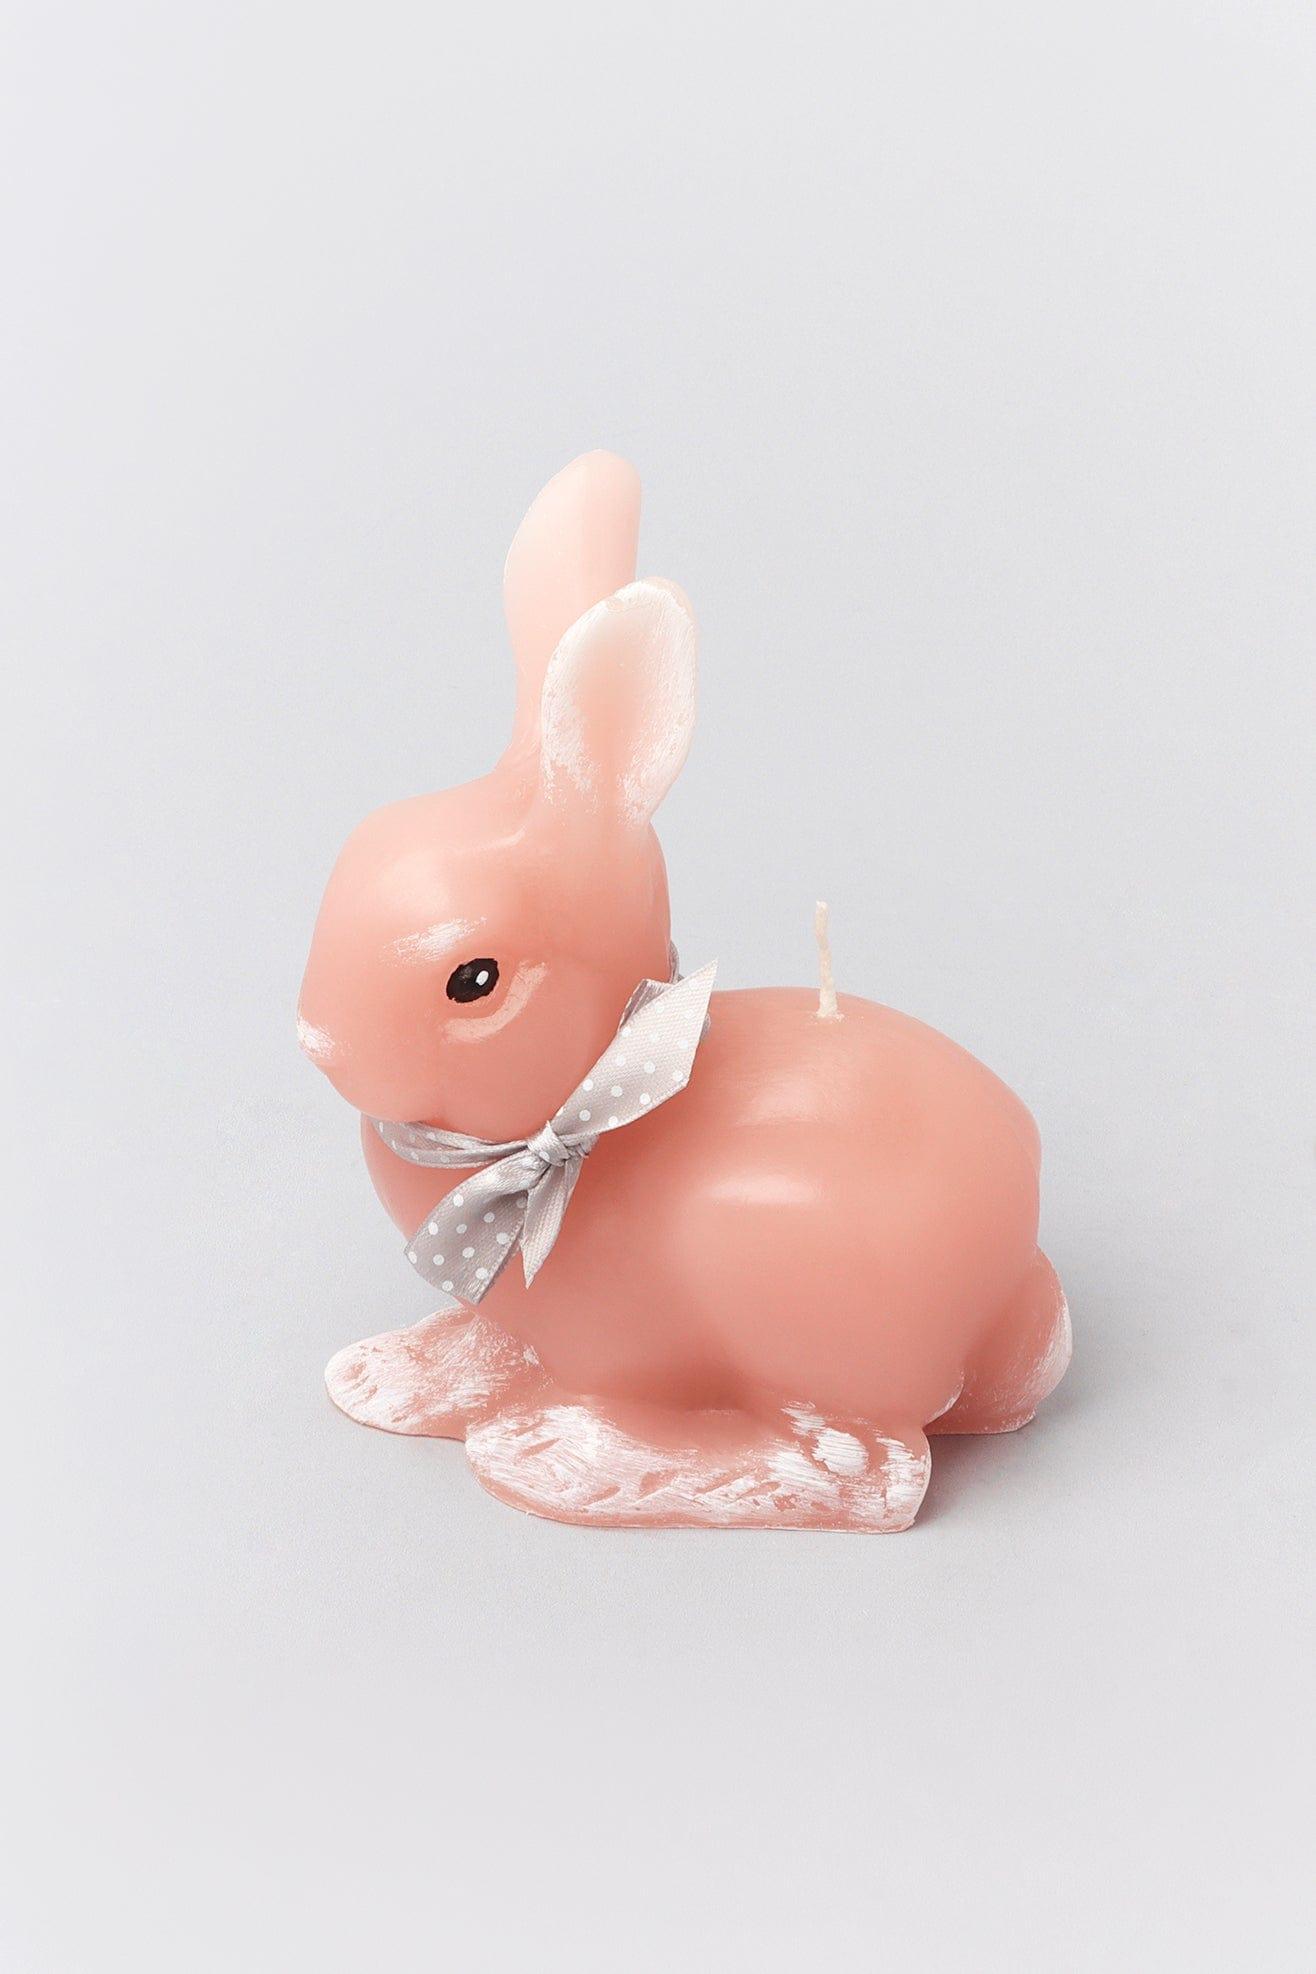 G Decor Candles & Candle Holders Cute Bunny Rabbit Bowtie 3D Candles